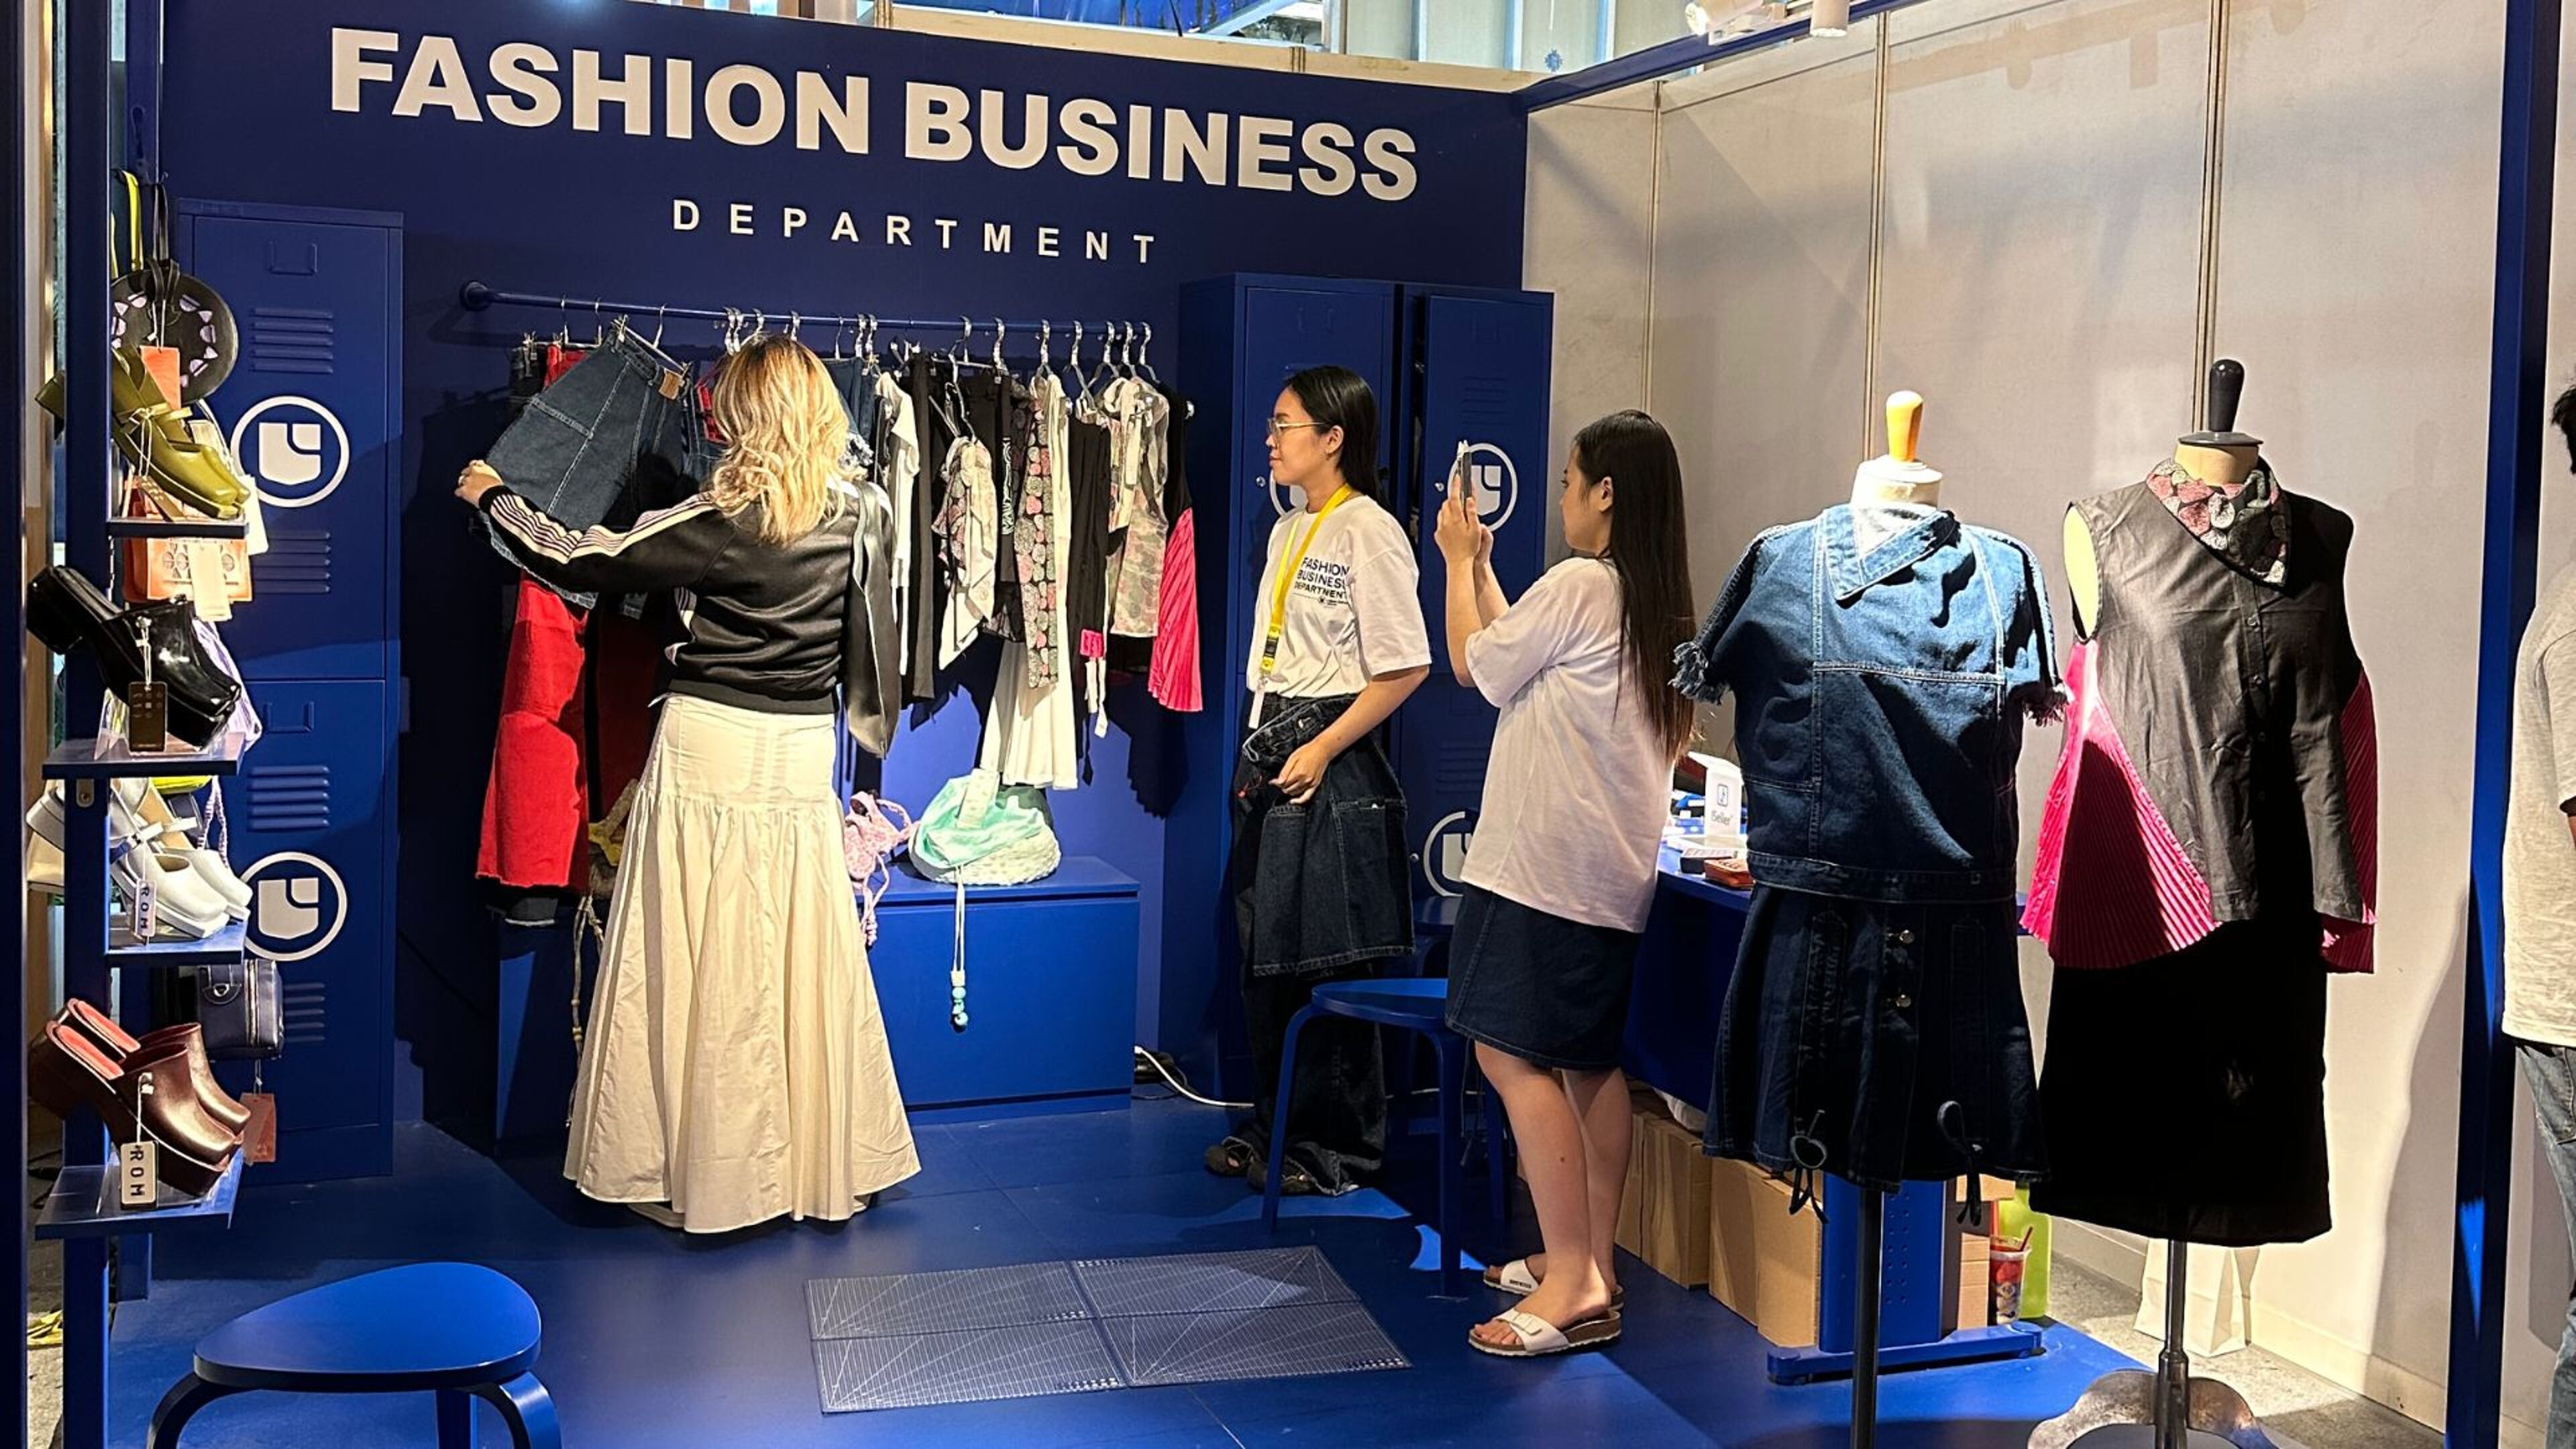 Attendees explore a fashion business department exhibit, examining various garments and accessories on display.